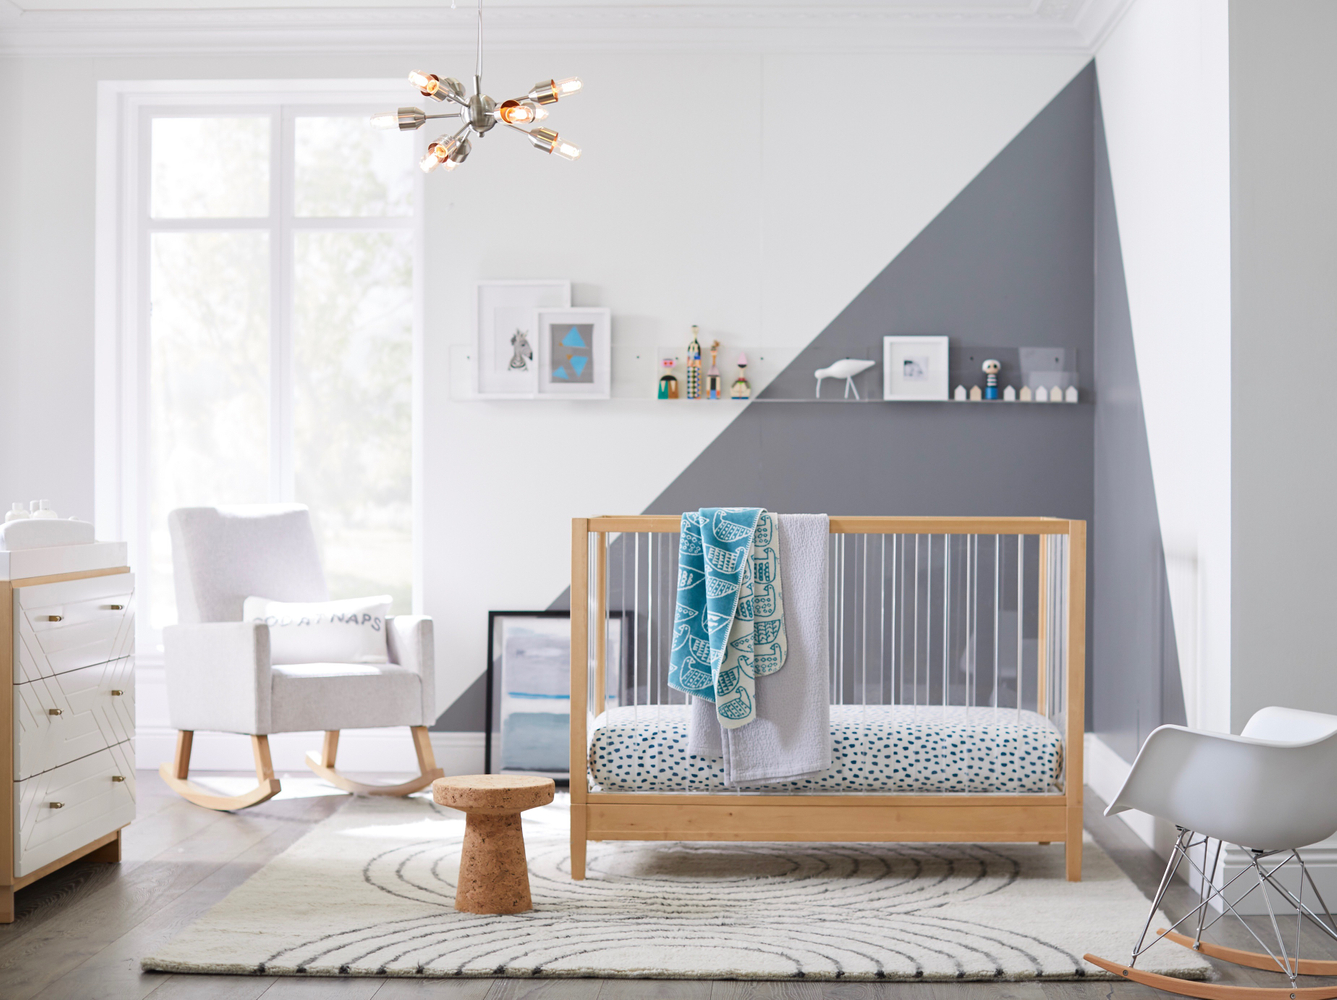 How to decorate a nursery with clean lines